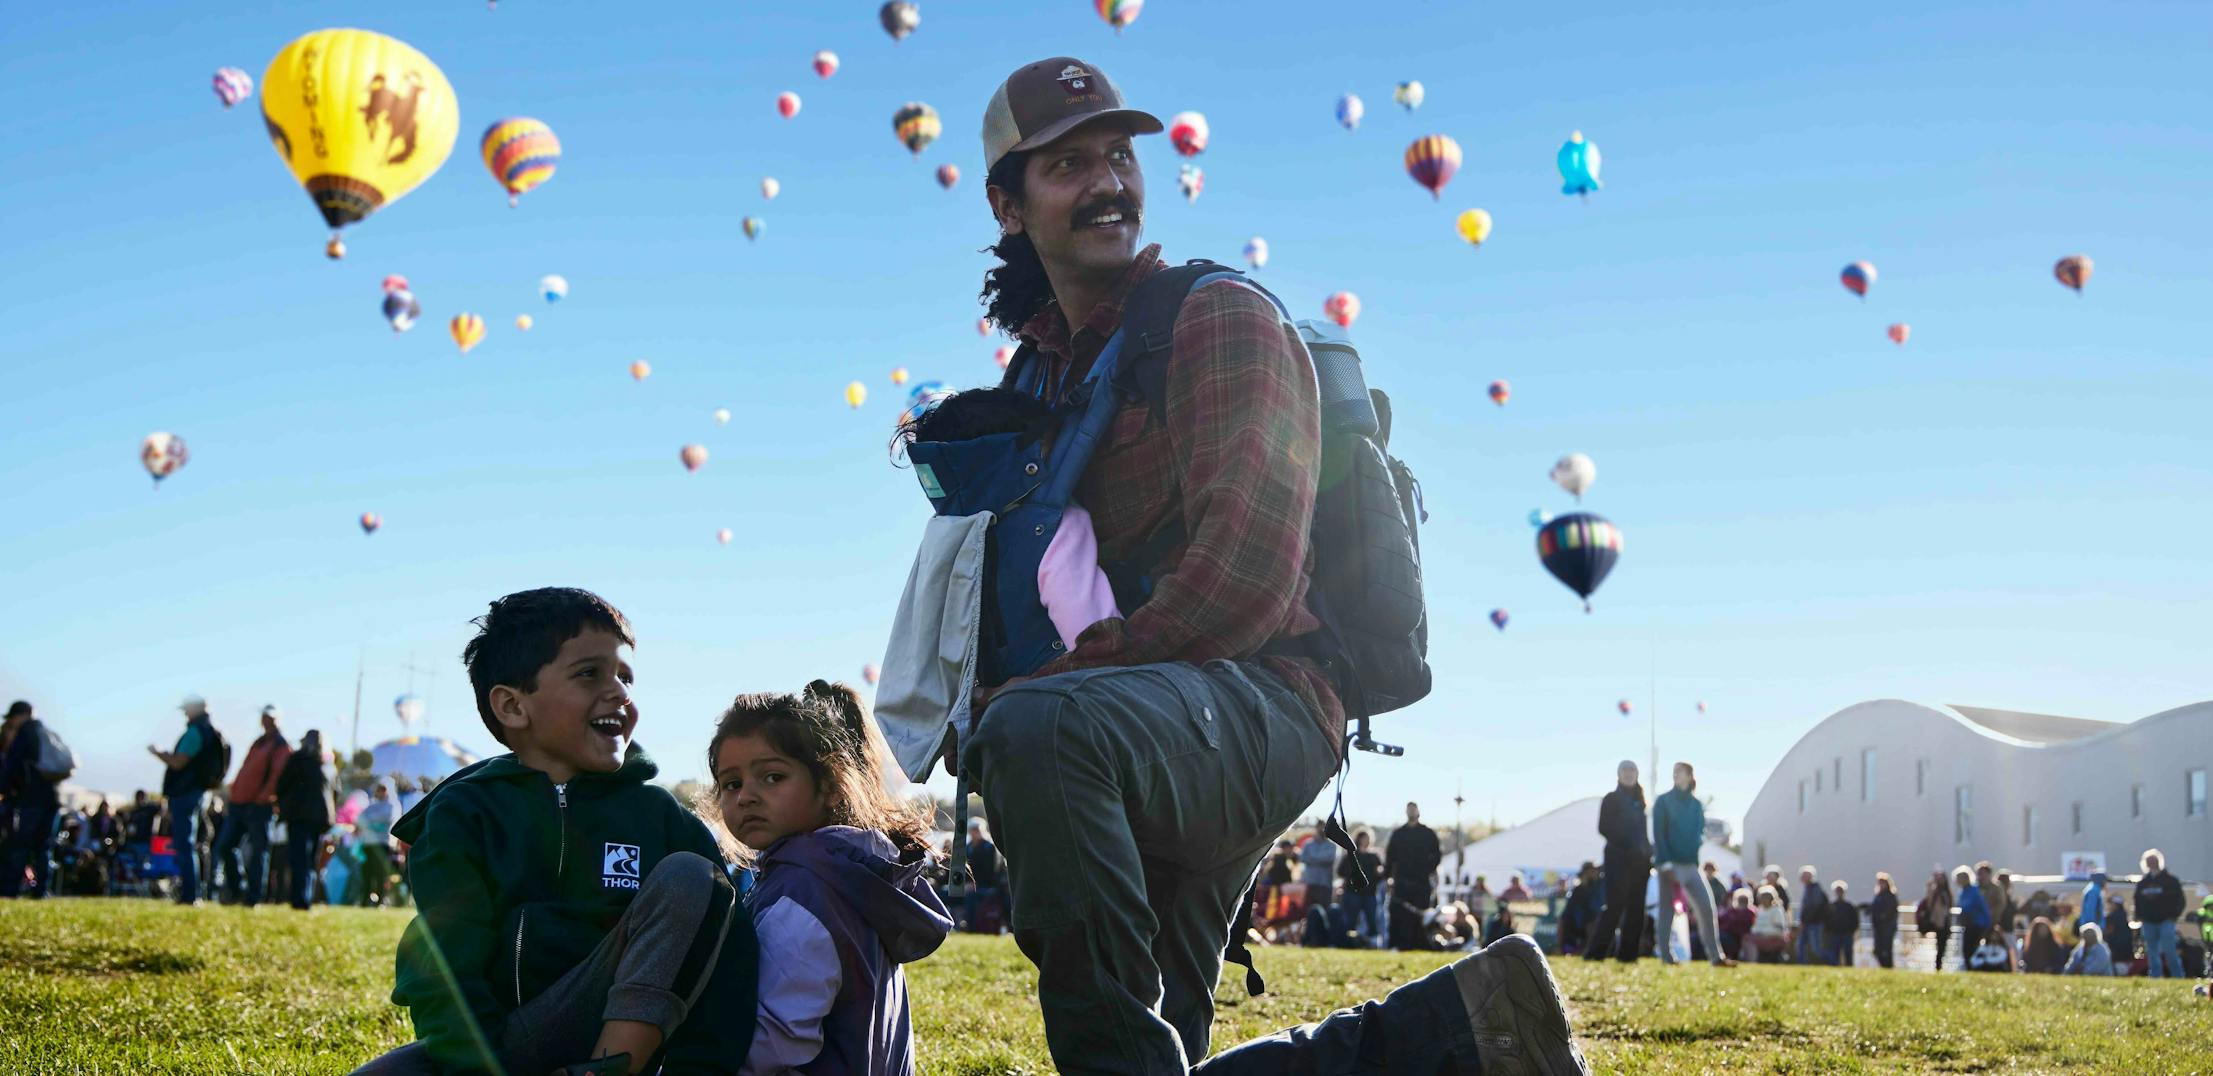 Brian Barton and his kids sitting in the grass at the Albuquerque Balloon Fiesta